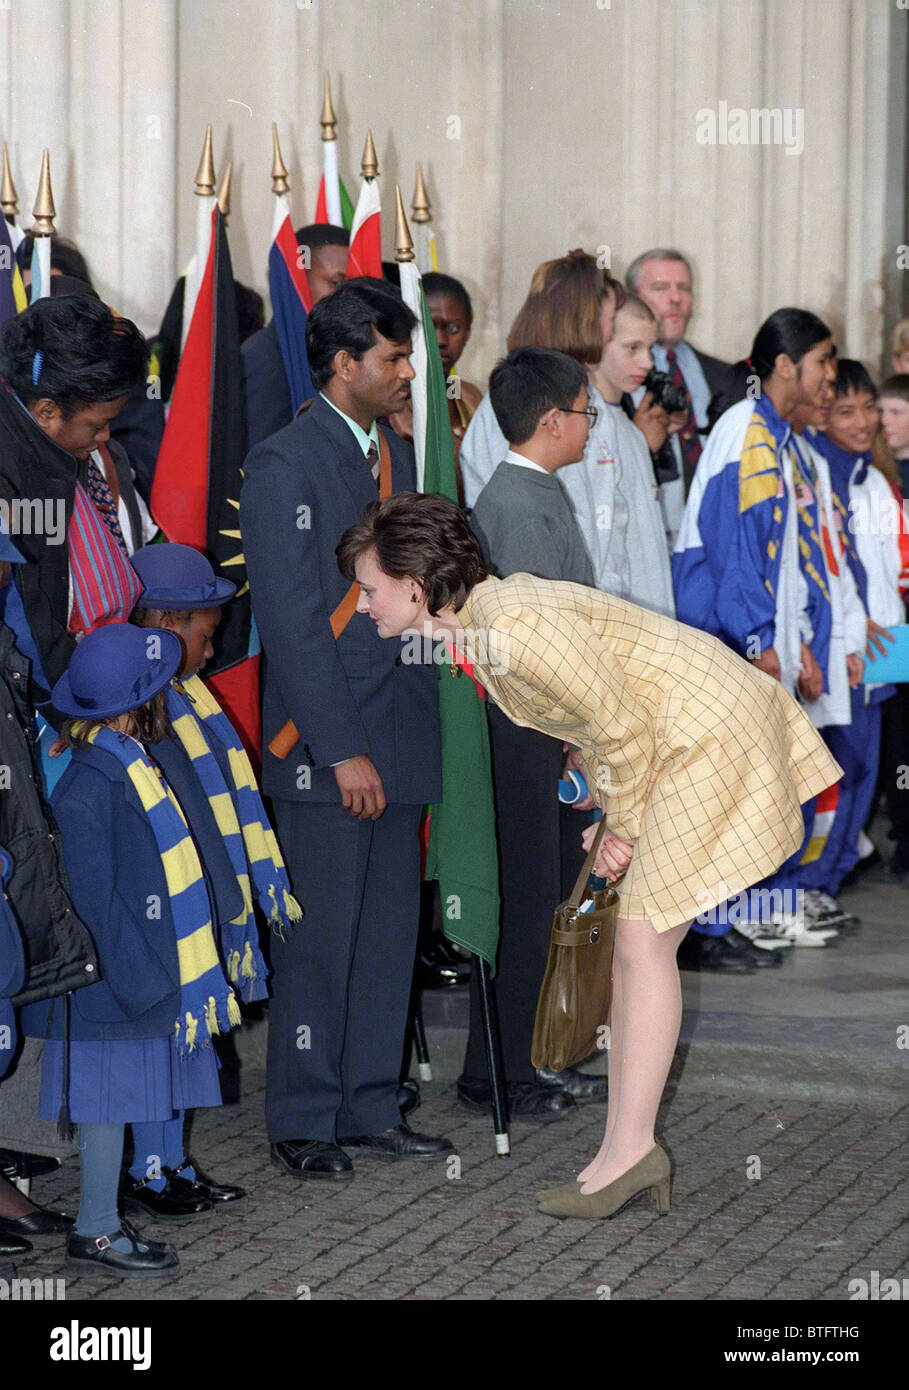 CHERIE BLAIR, WIFE OF THE PRIME MINISTER, AT Westminster Abbey FOR COMMONWEALTH SERVICE Stock Photo